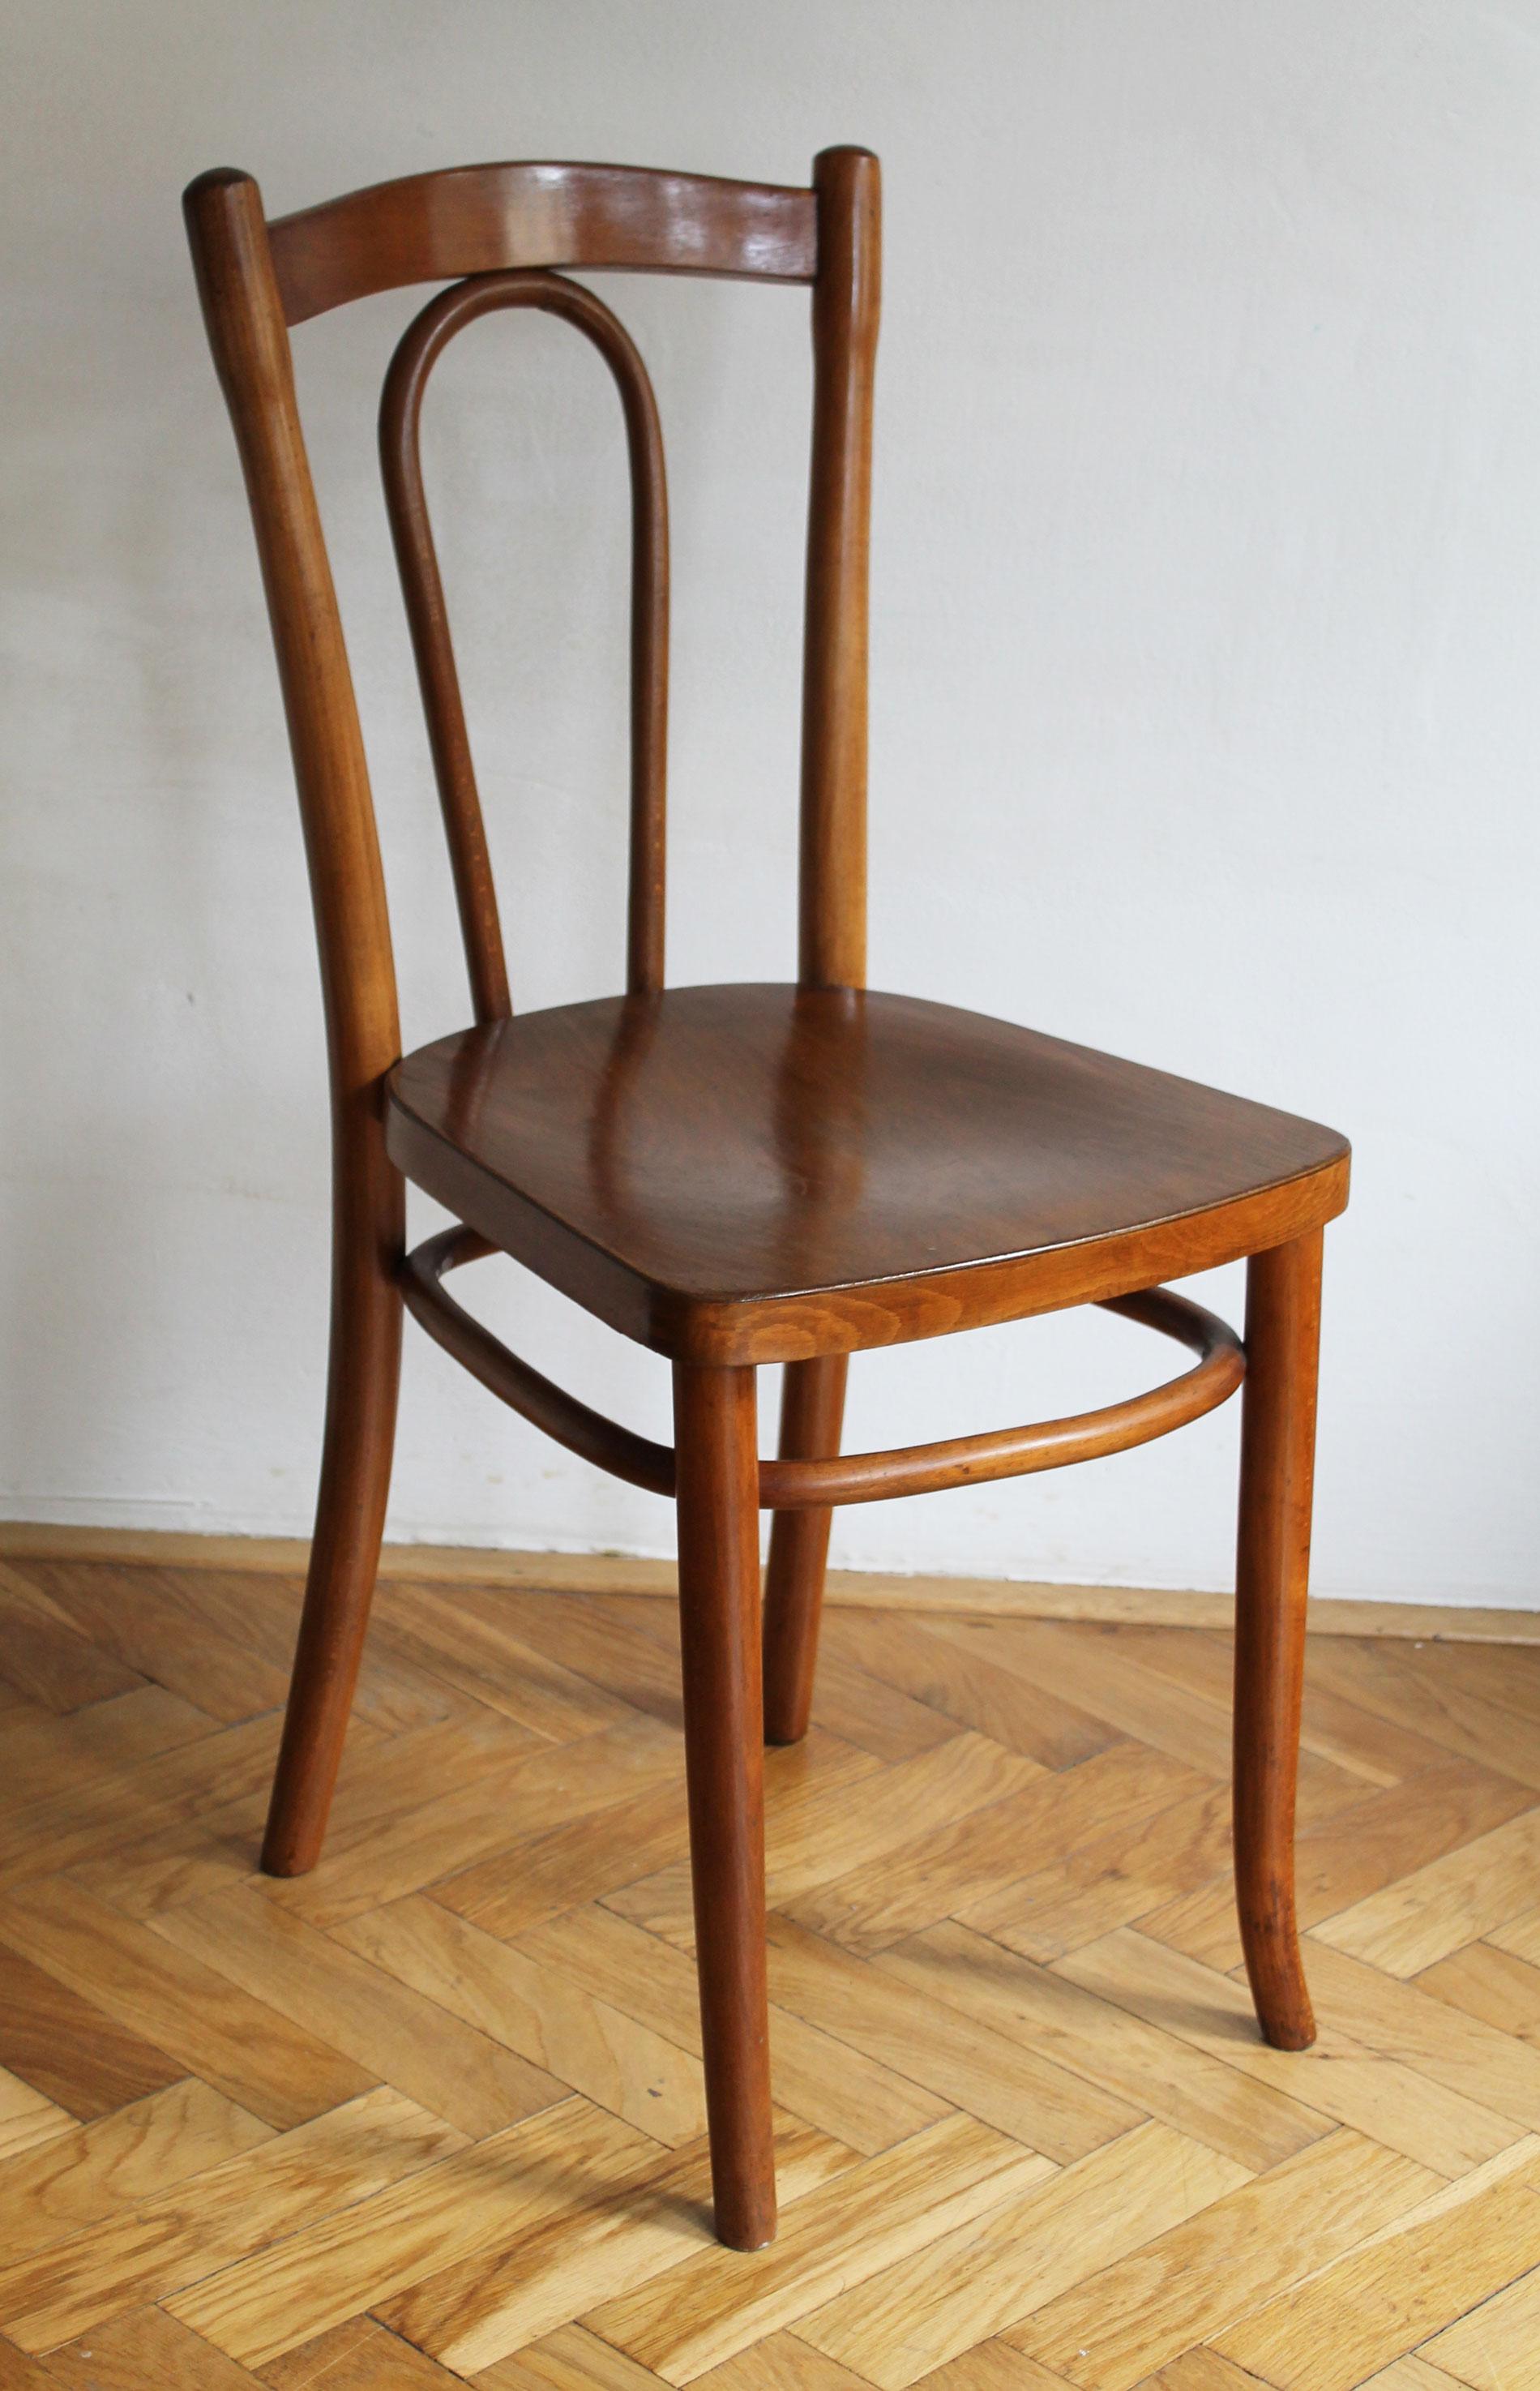 Early 20th Century 1920's Dining Chair Model No. 105 by Gebrüder Thonet For Sale